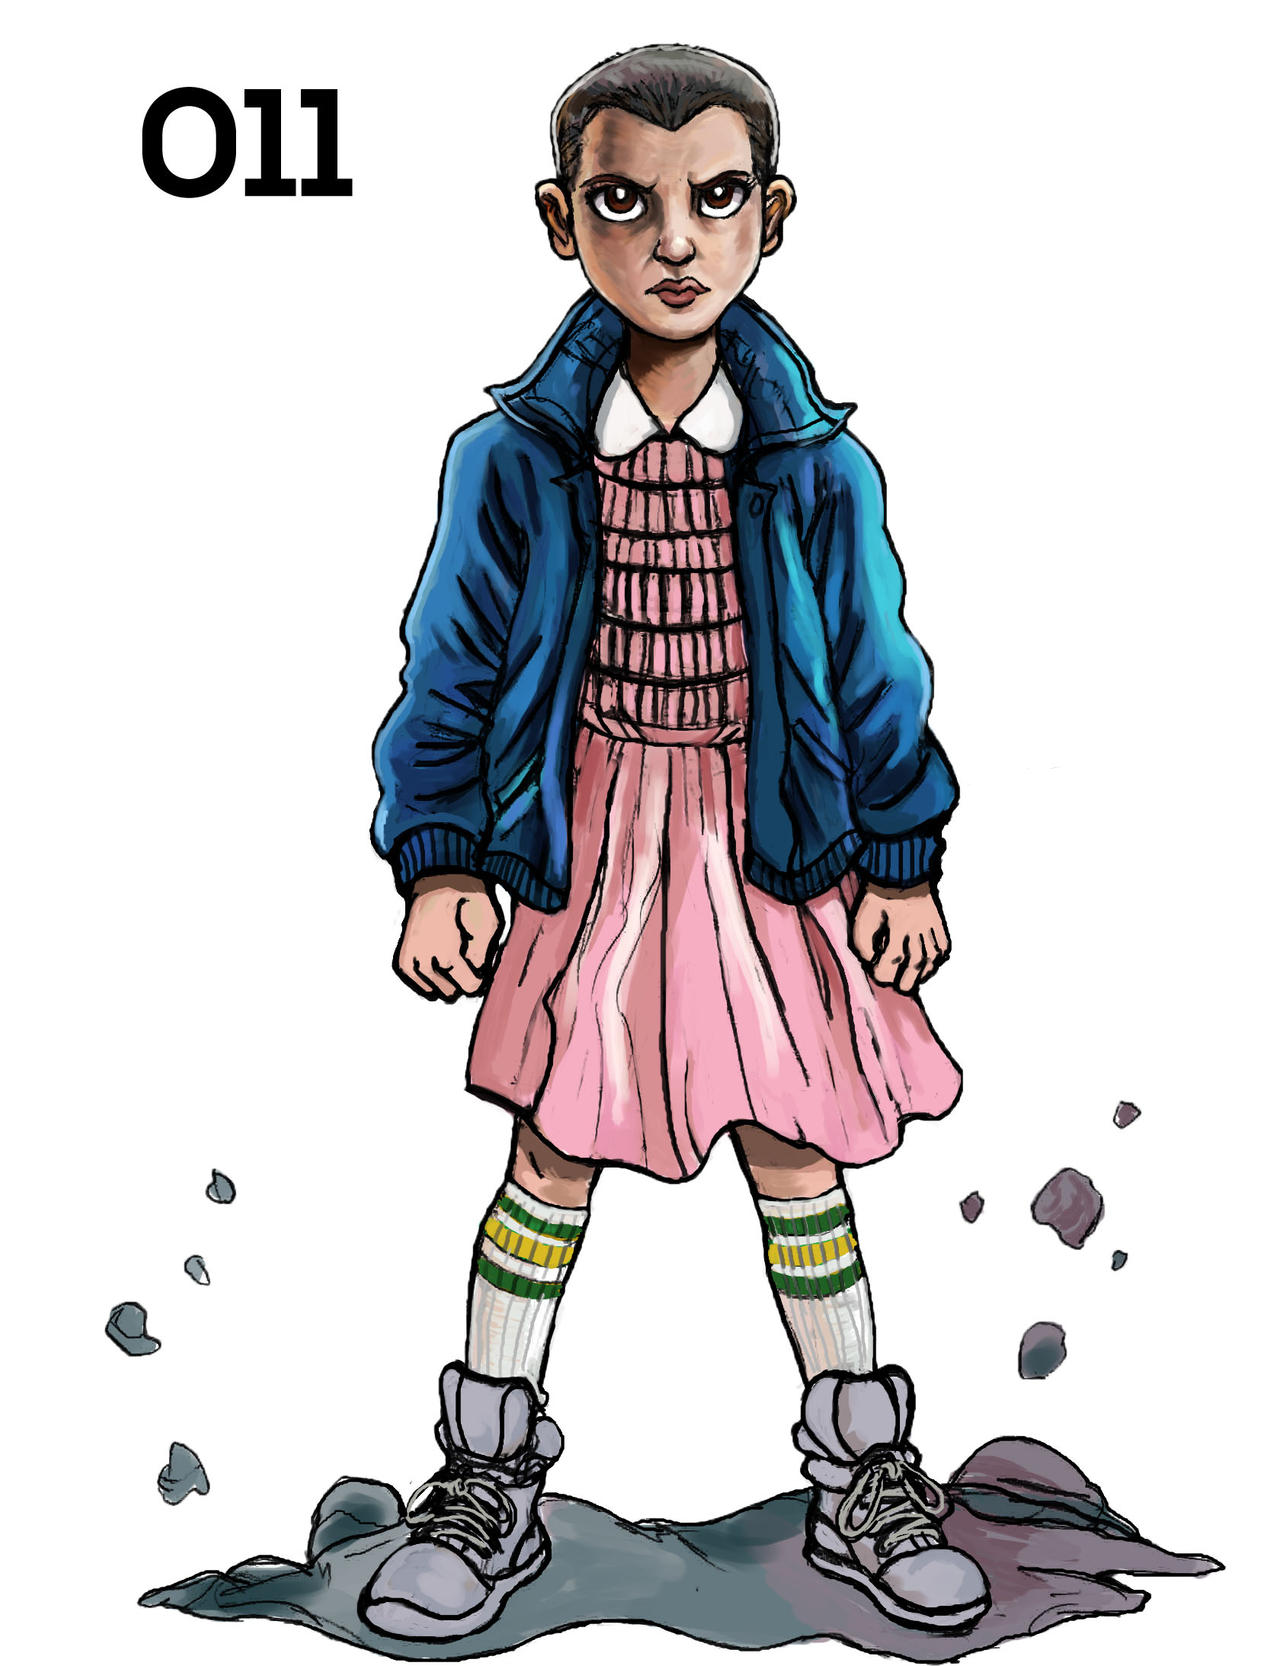 Eleven - Stranger Things by TheLivingShadow on DeviantArt